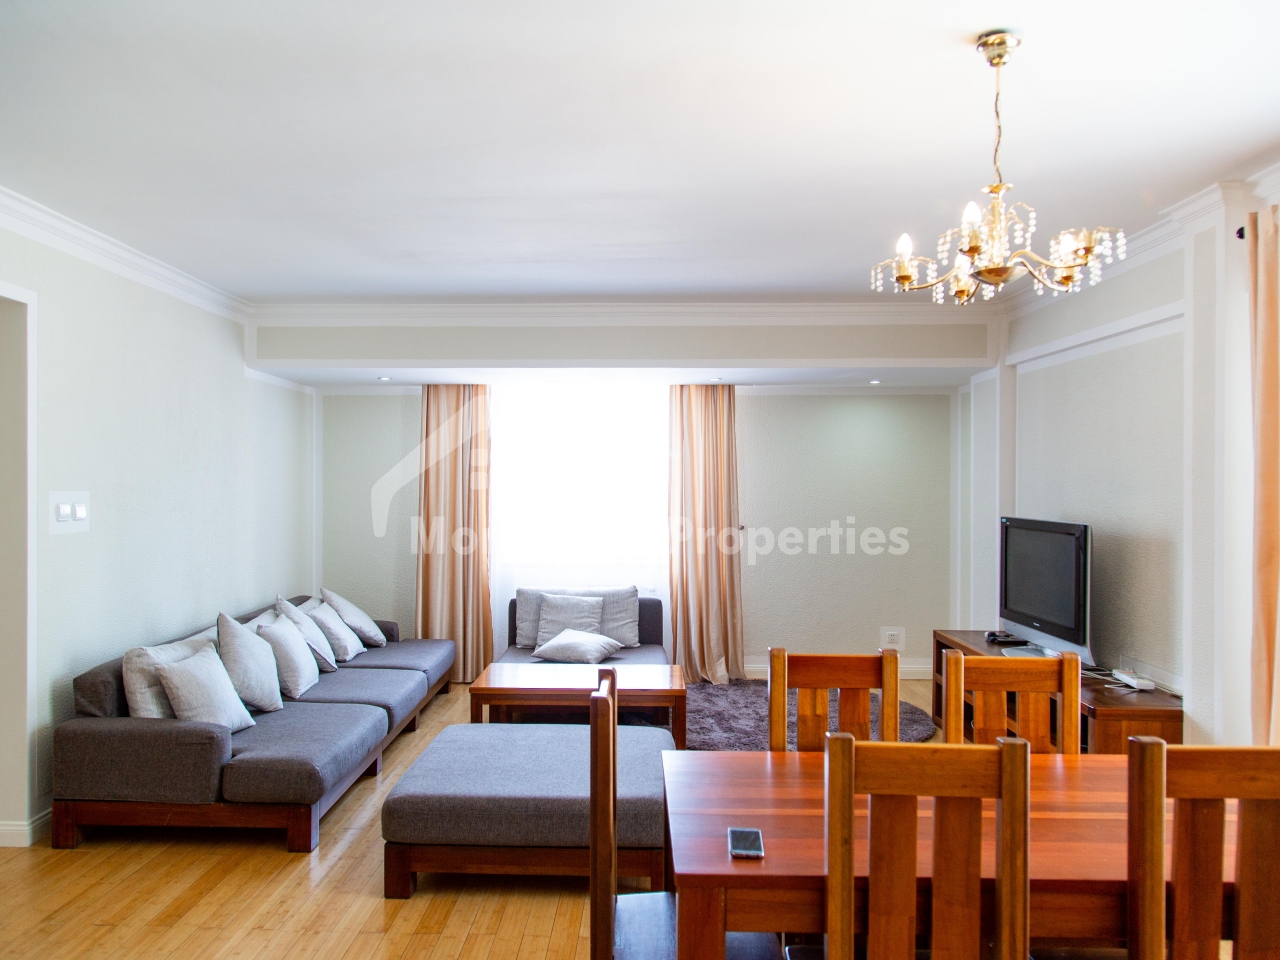 BEAUTIFUL 2 BEDROOM APARTMENT IS FOR RENT IN THE HEARTH OF THE CITY AT PARK VIEW RESIDENCE